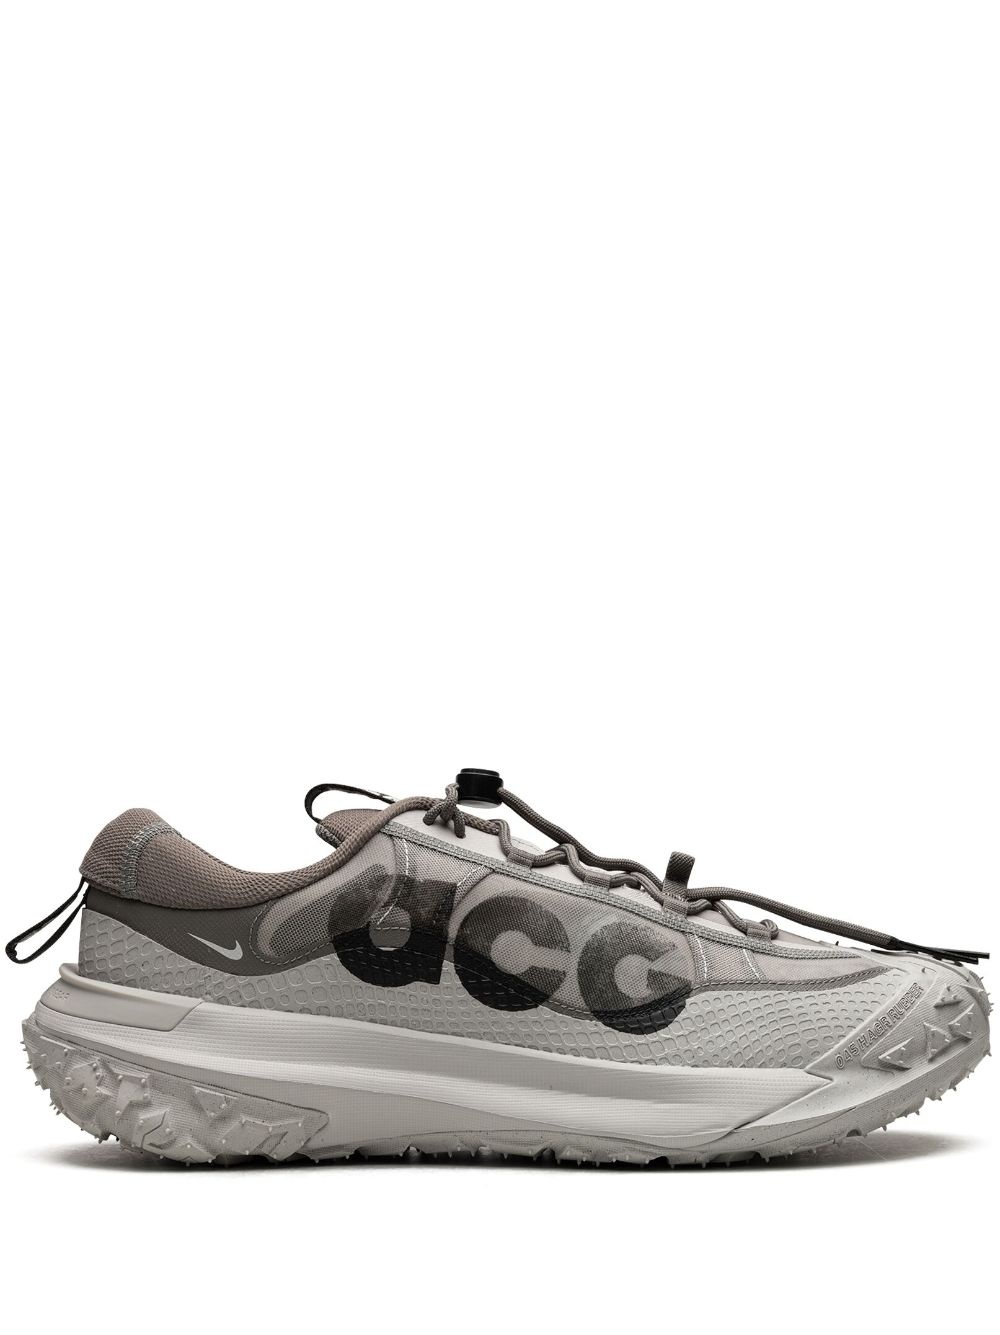 ACG Mountain Fly Low 2 "Iron Ore" sneakers - 1